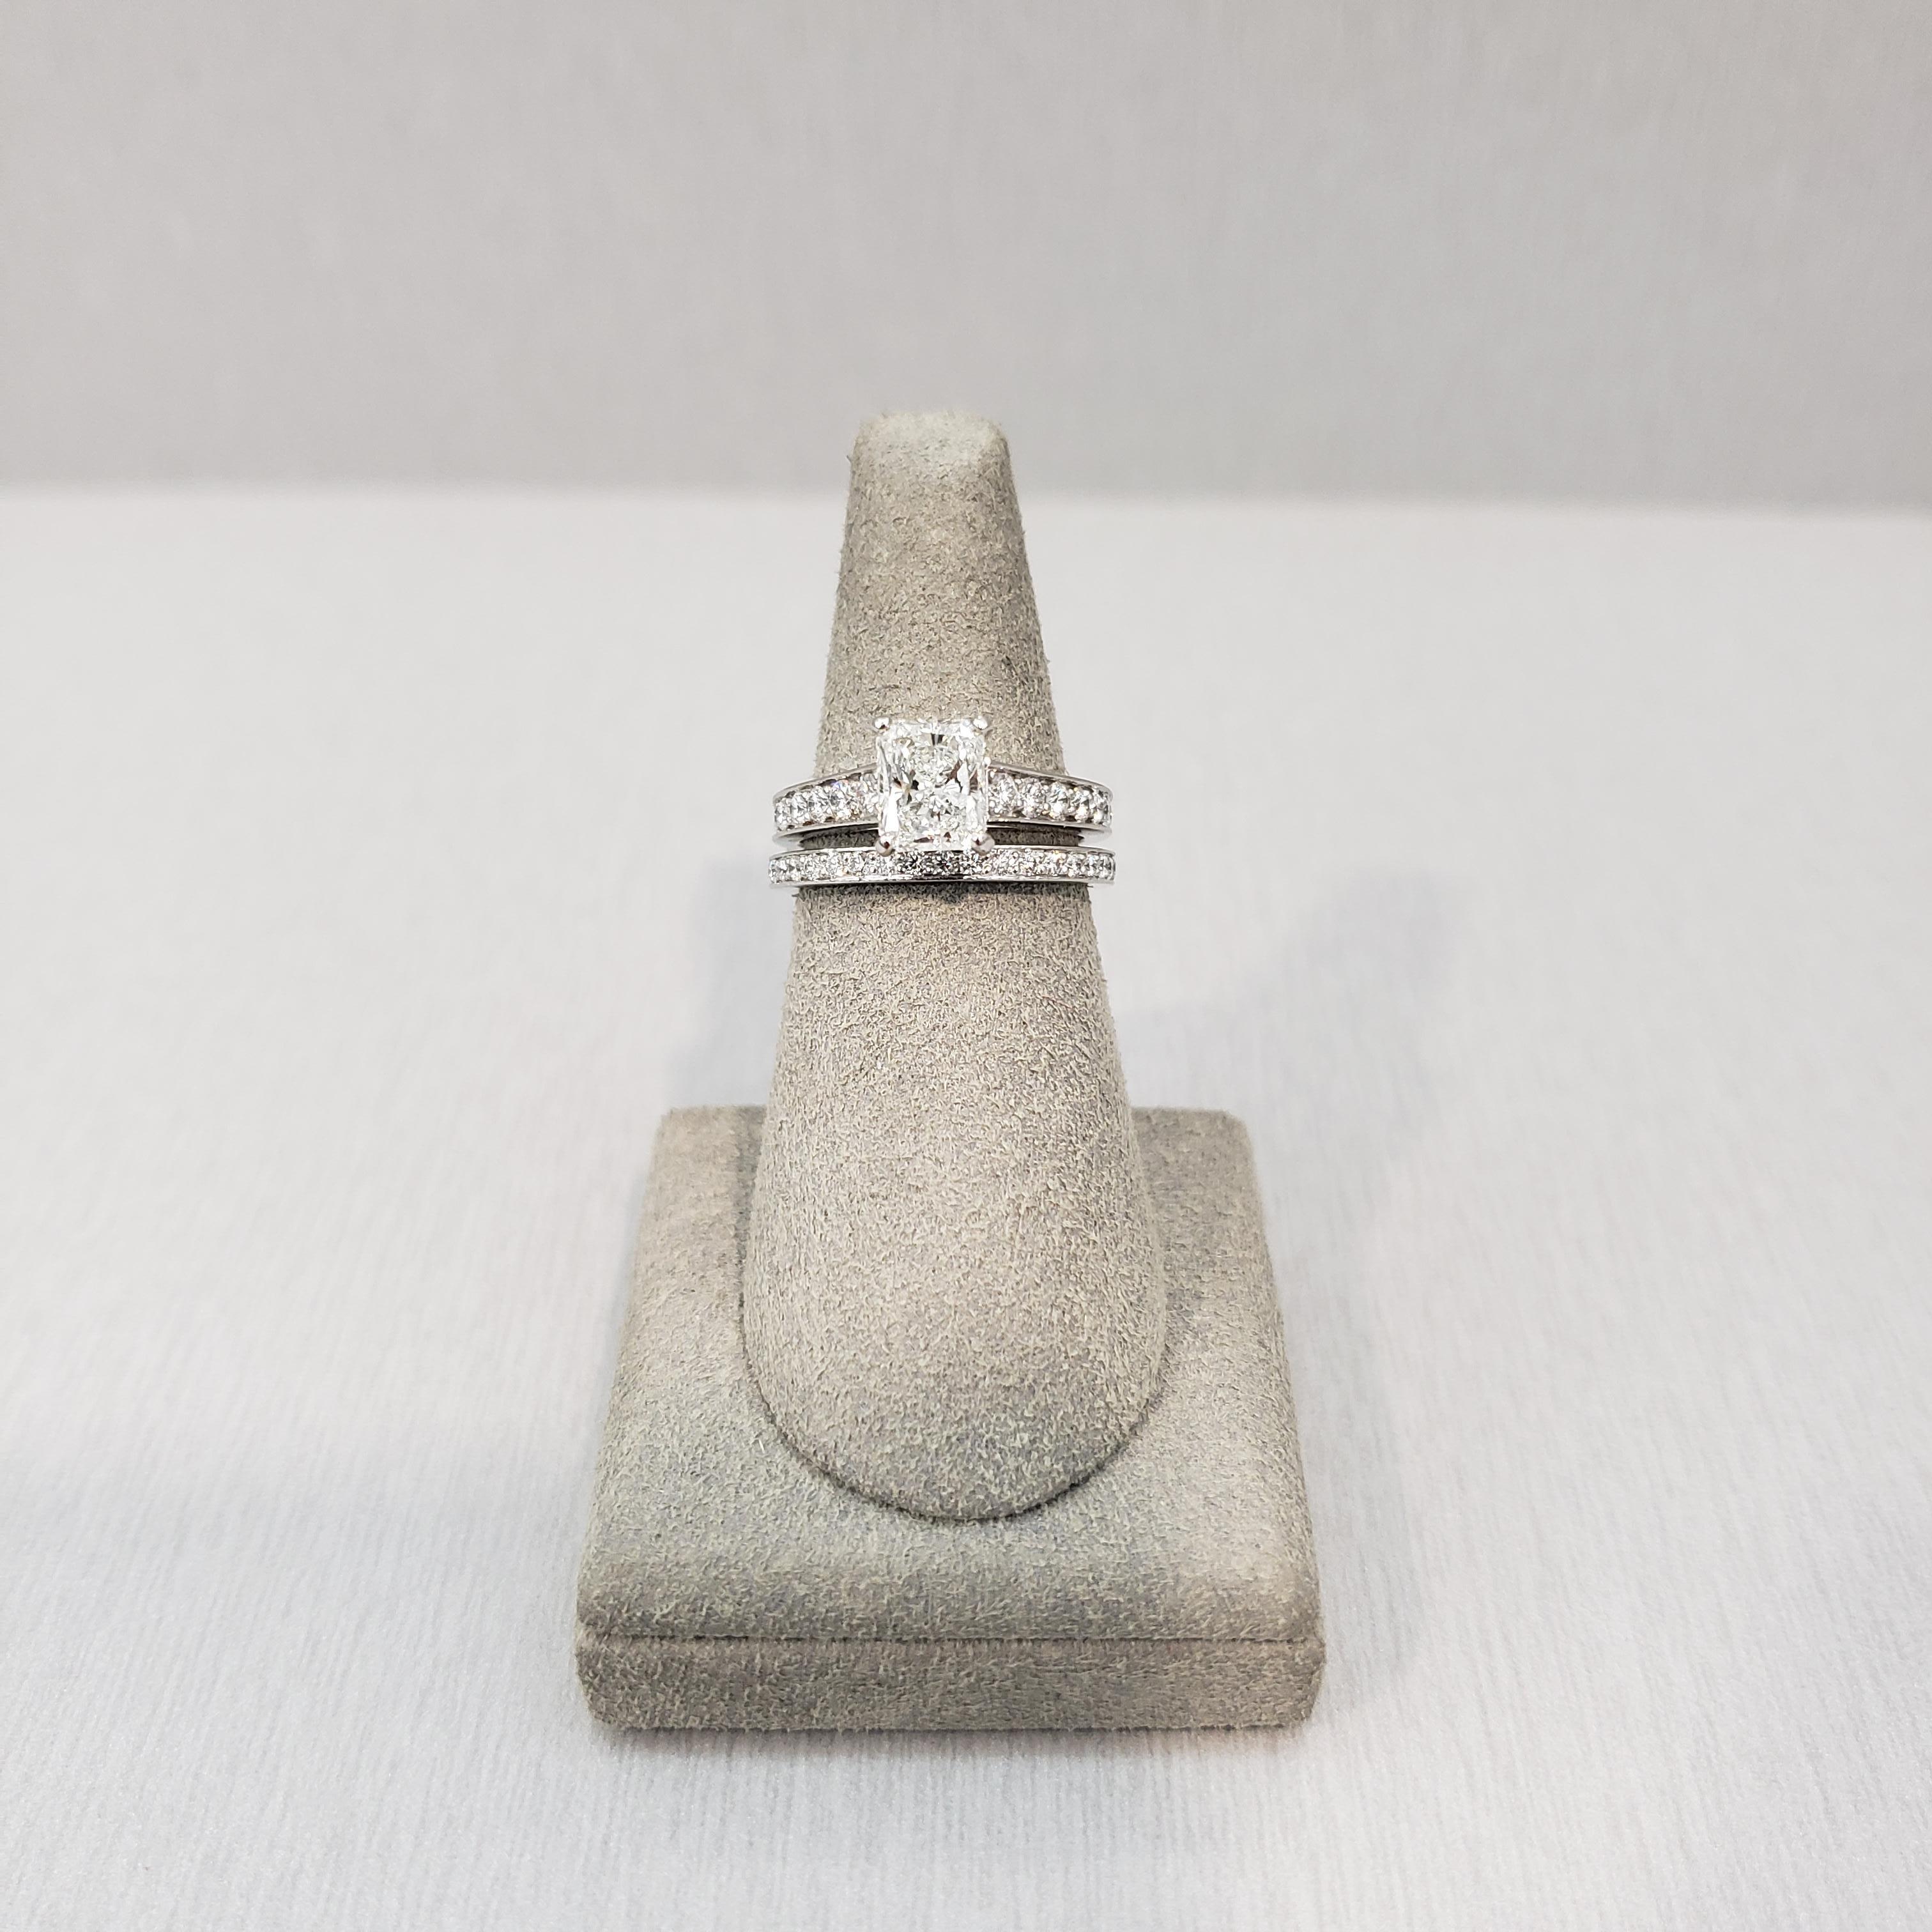 Custom Order Engagement Ring:
Radiant Cut Diamond weighing 1.00 - 1.05 carats (GIA Certified G color, VVS1 clarity). Set in a handcrafted Cartier 1895 style setting made in platinum. Side diamonds weigh approximately 0.60 carats total.

Includes a